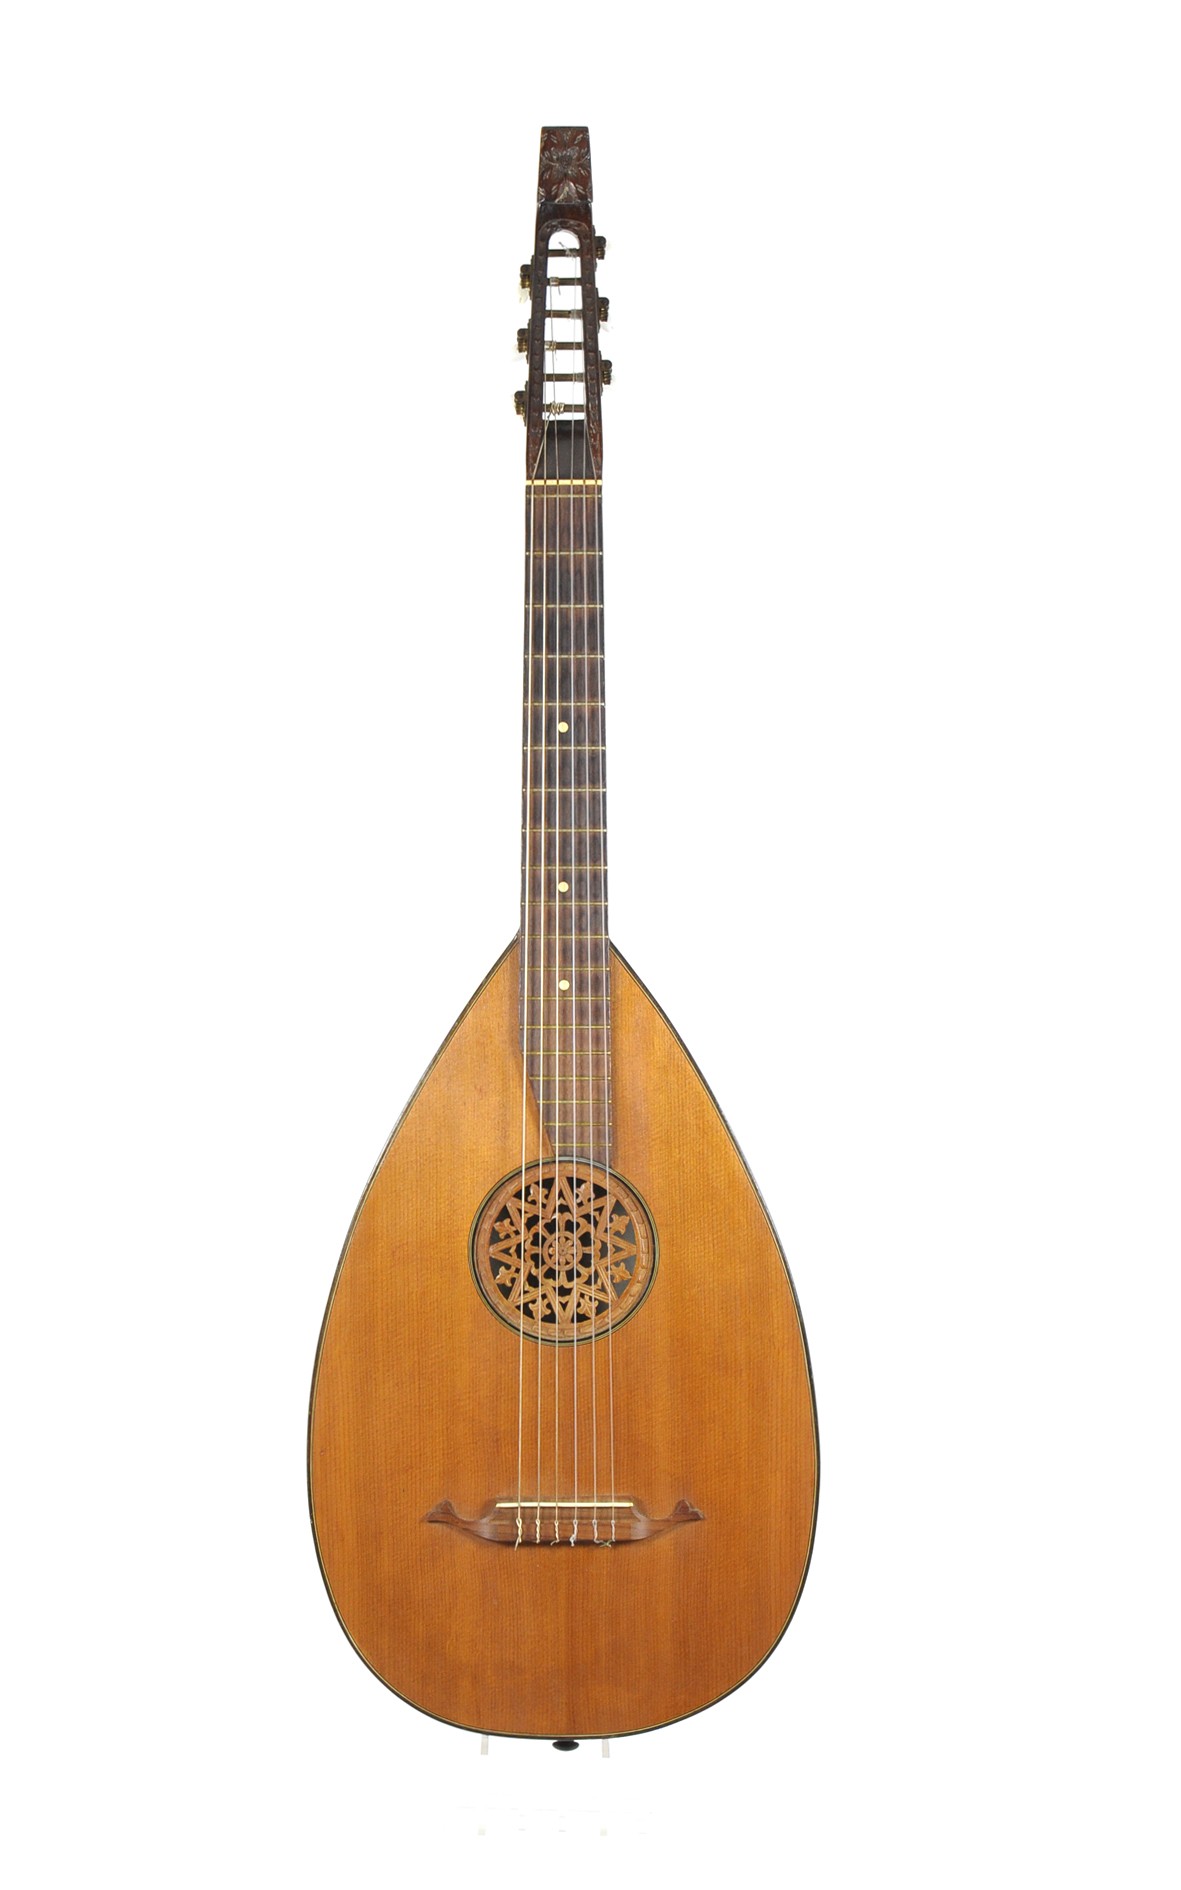 Lute-guitar resp. Wandervogellaute by VEB Sinfonia, table with beautifully carved rose